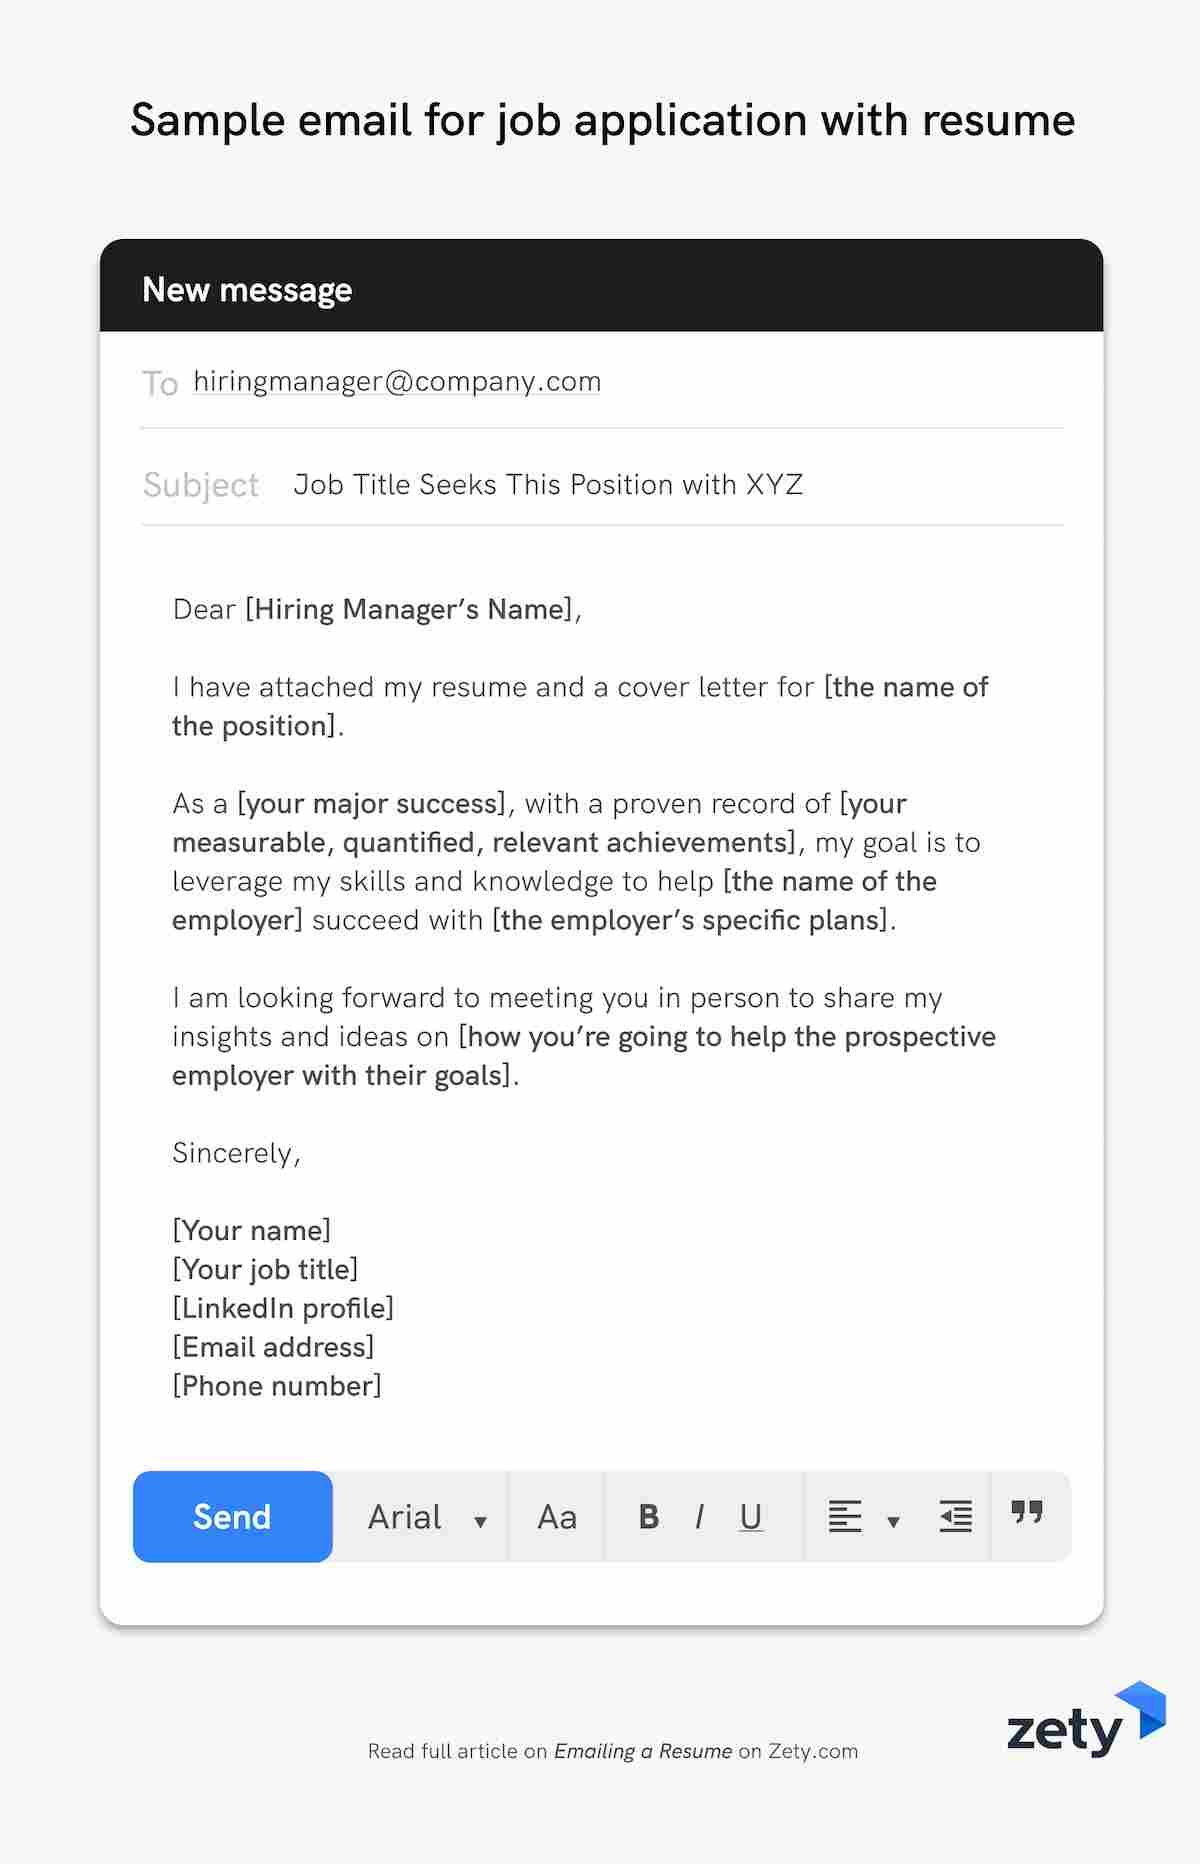 Sample Email for Sending A Resume and Cover Letter How to Email A Resume to An Employer: 12lancarrezekiq Email Examples